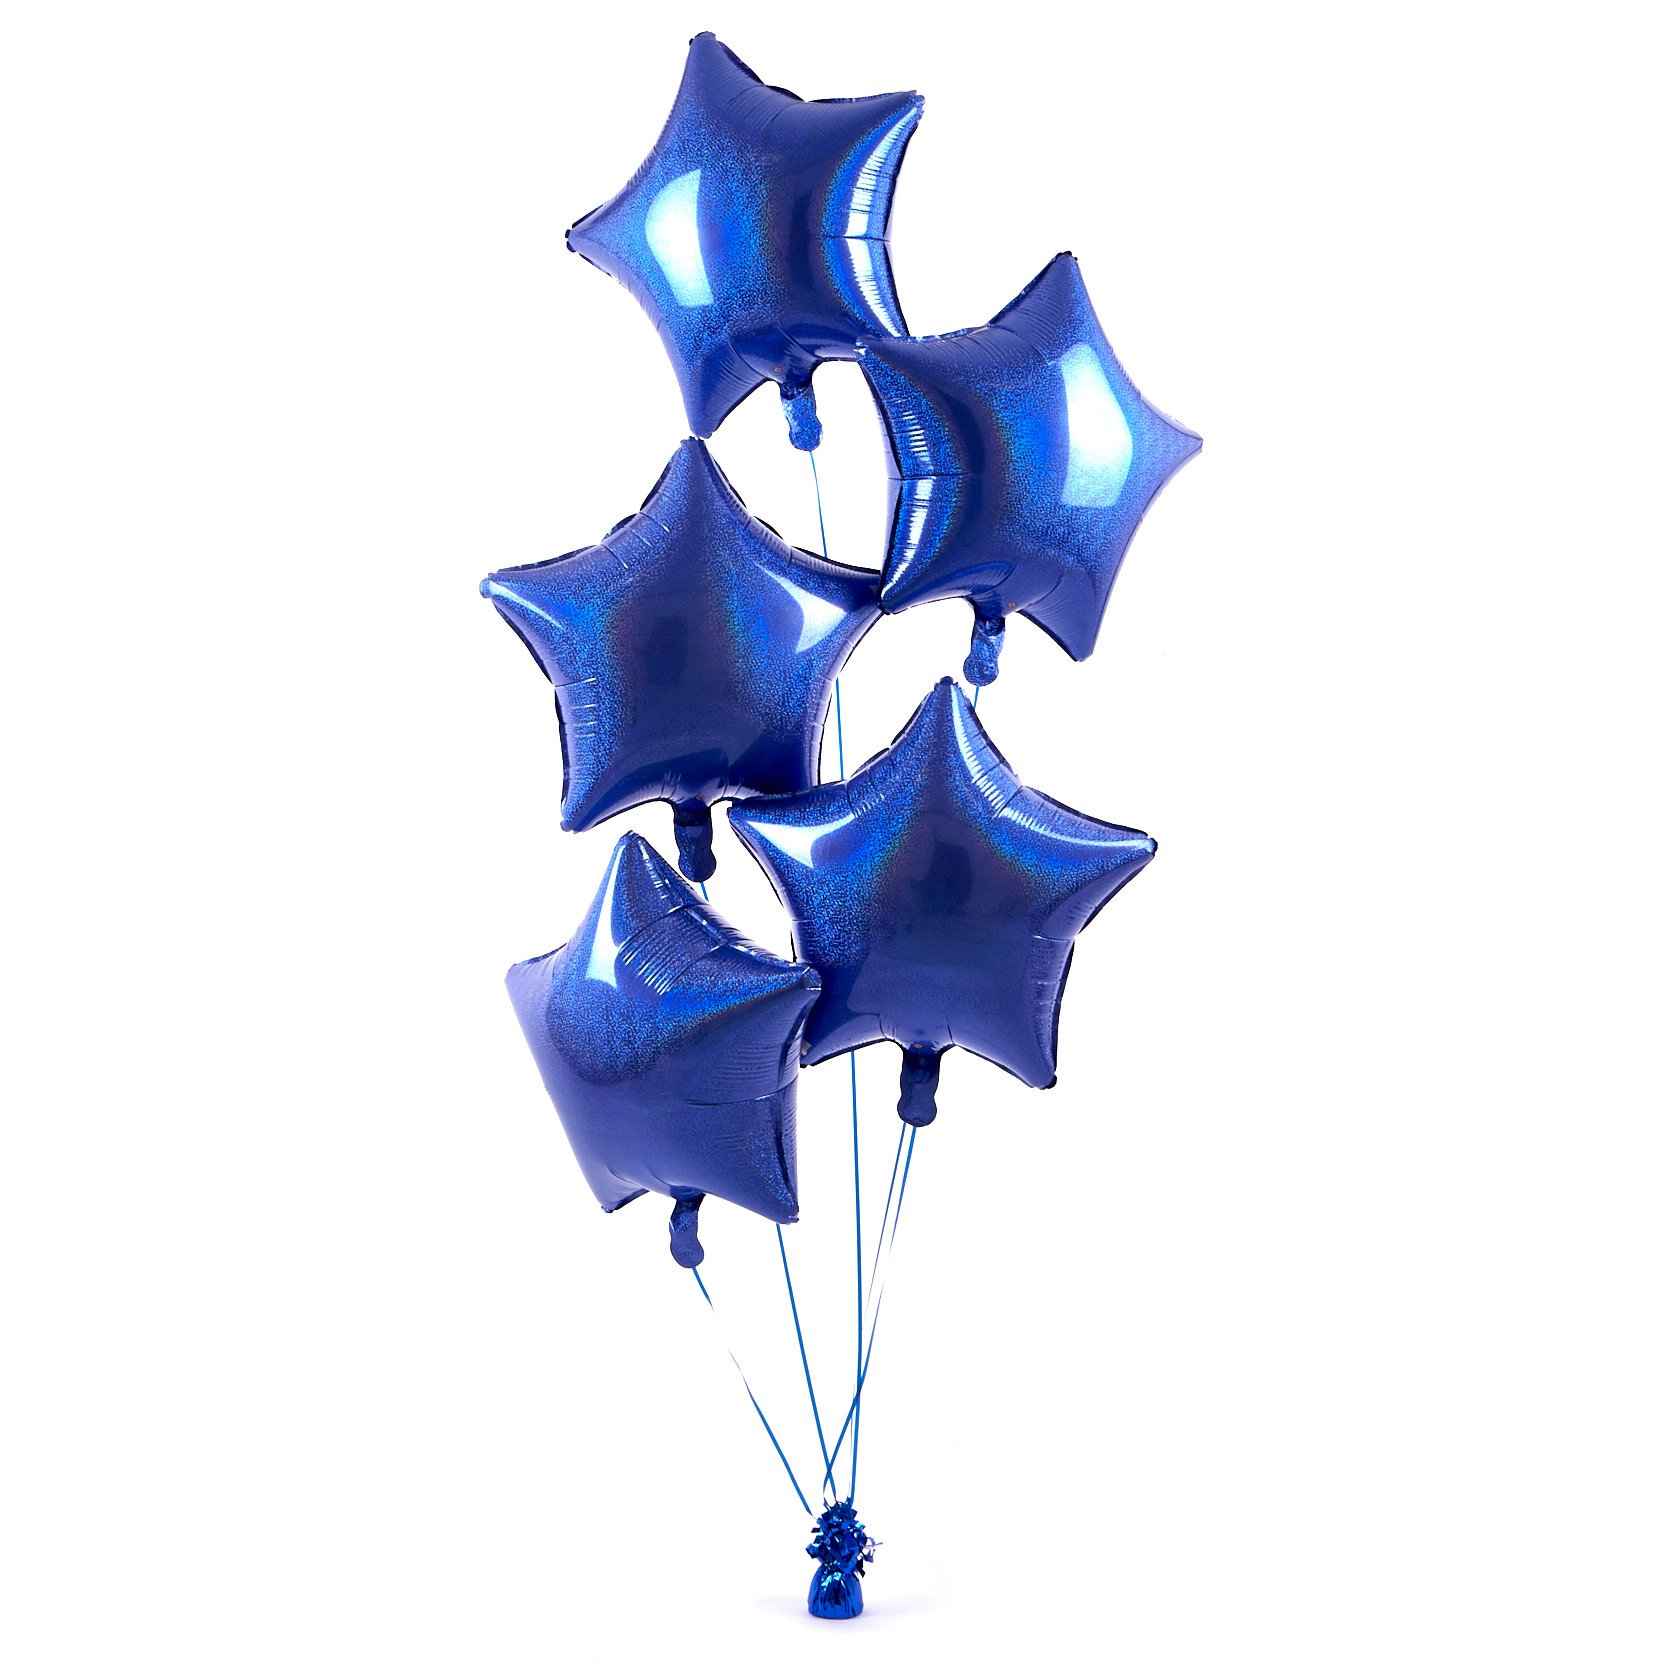 5 Royal Blue Stars Balloon Bouquet - DELIVERED INFLATED! 